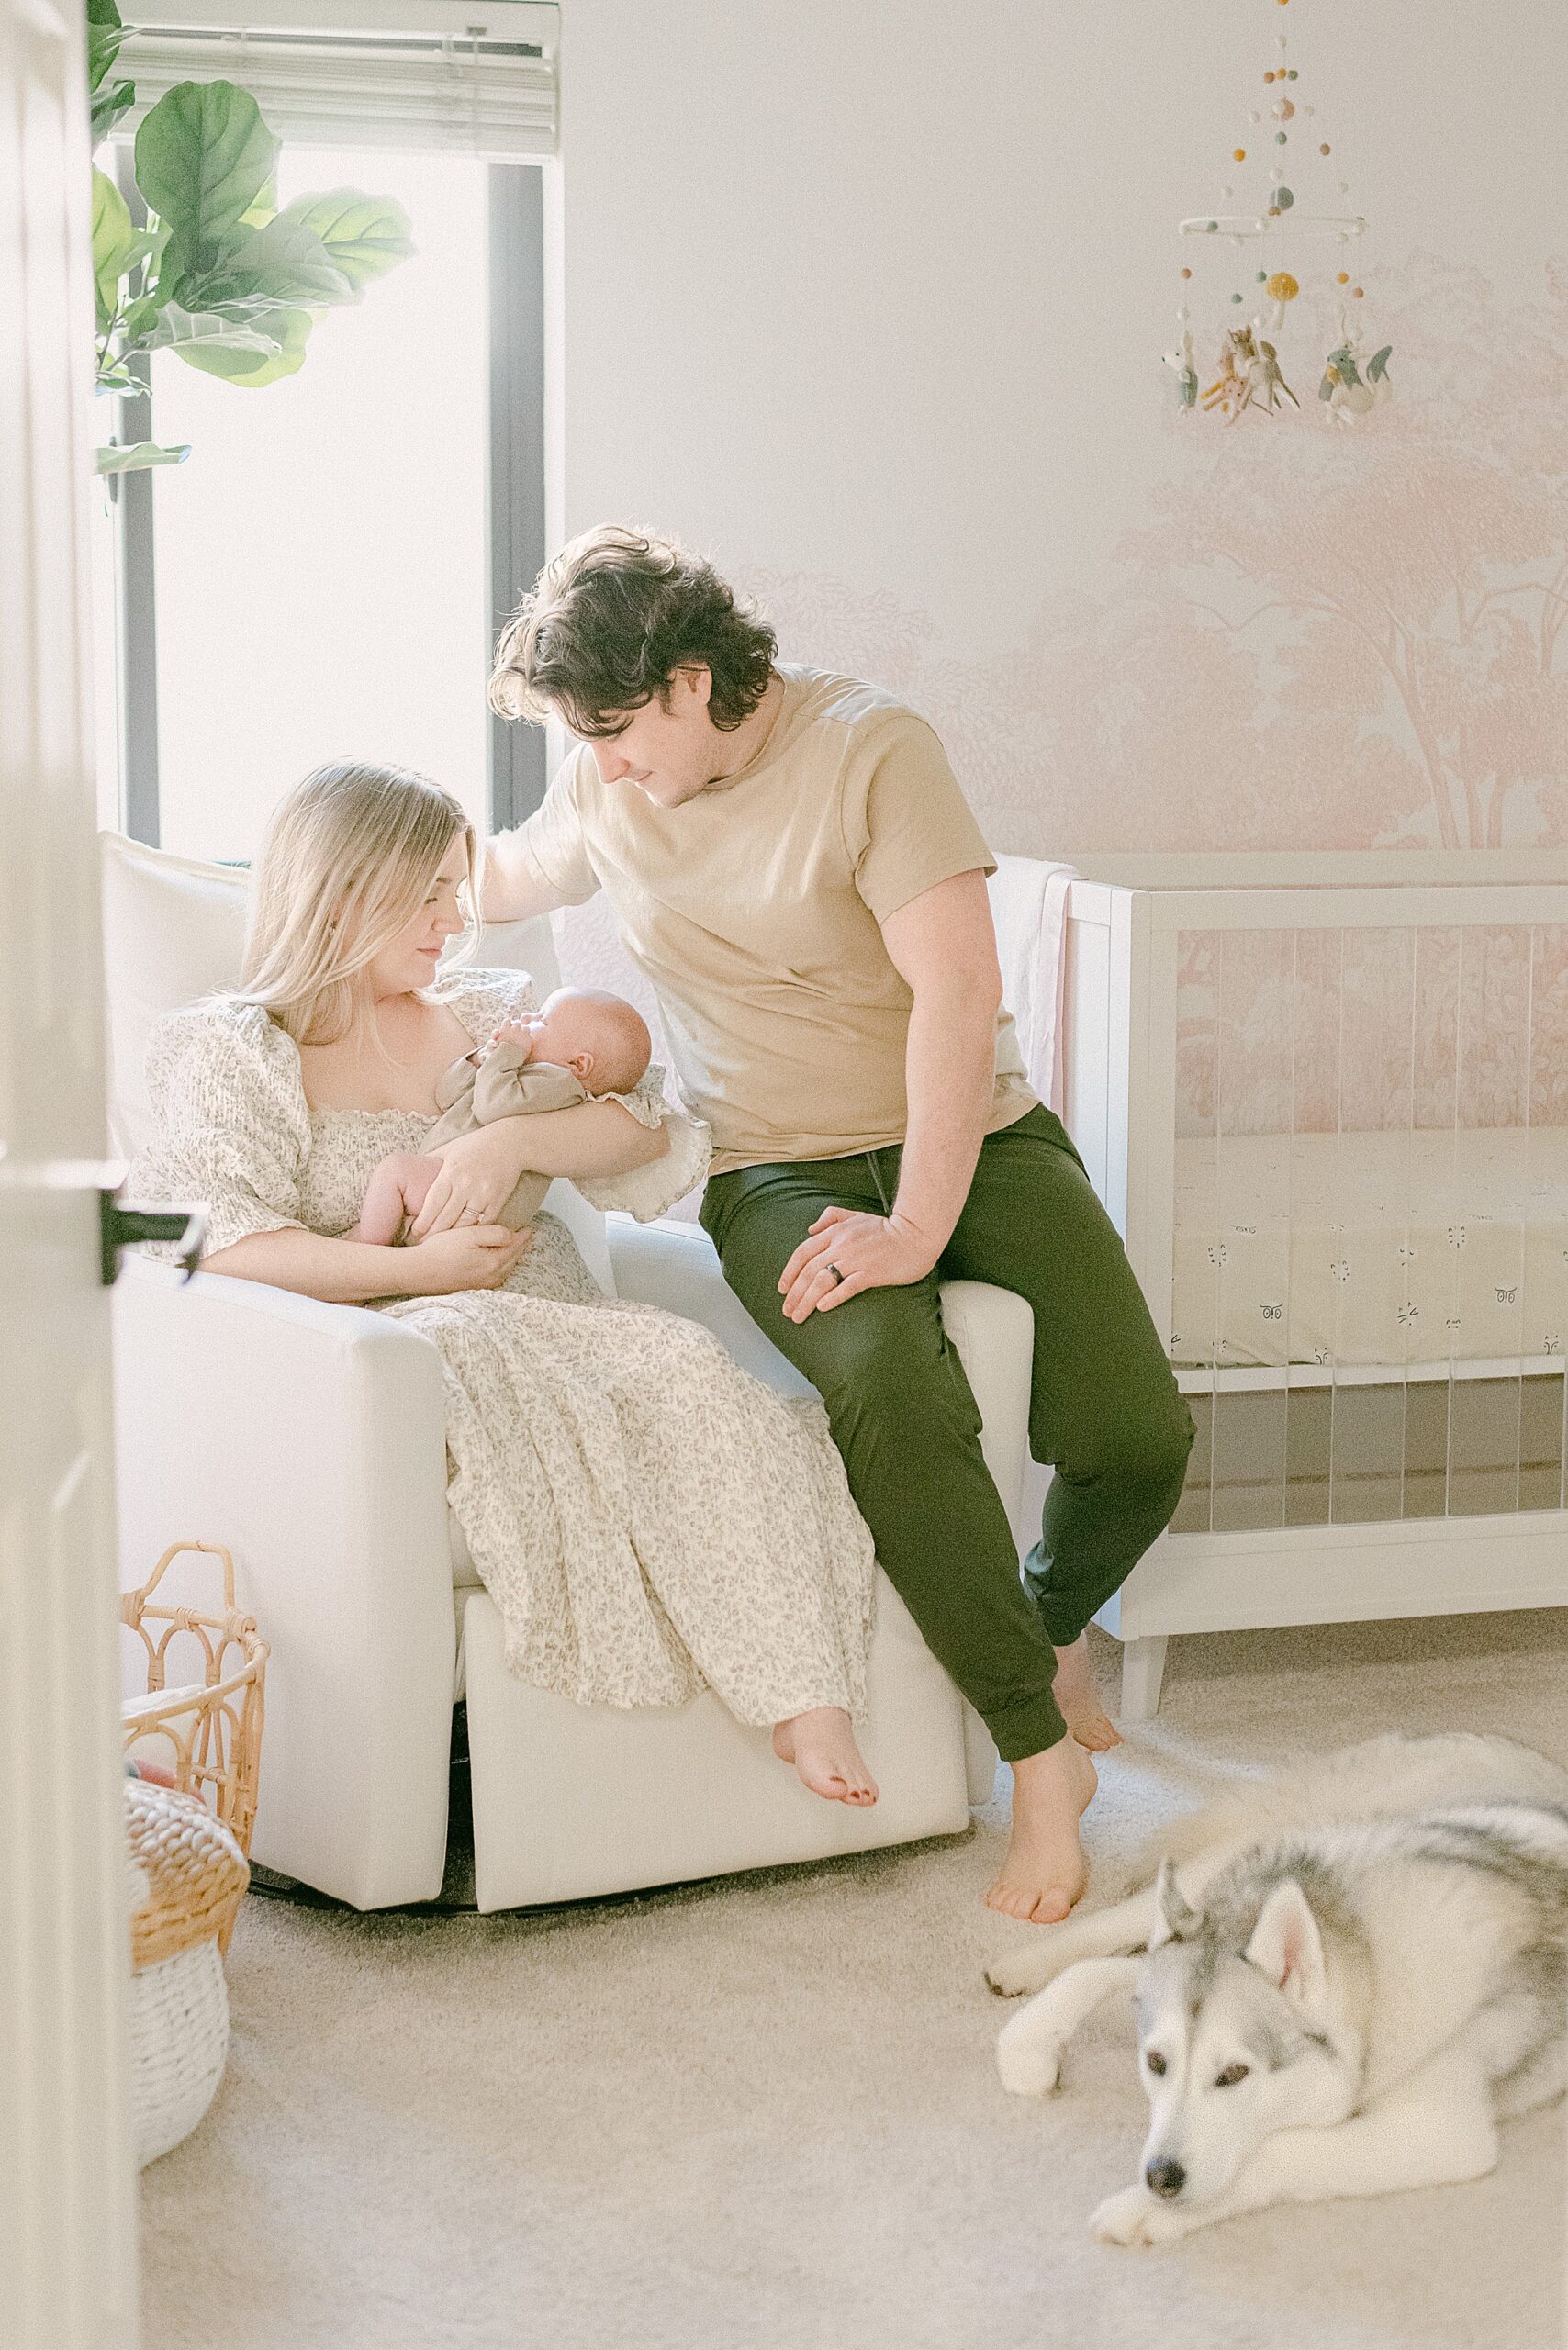 Mom and dad are sitting on rocker in blush and cream colored baby nursery while holding newborn. Siberian husky is laying on the floor looking at camera.